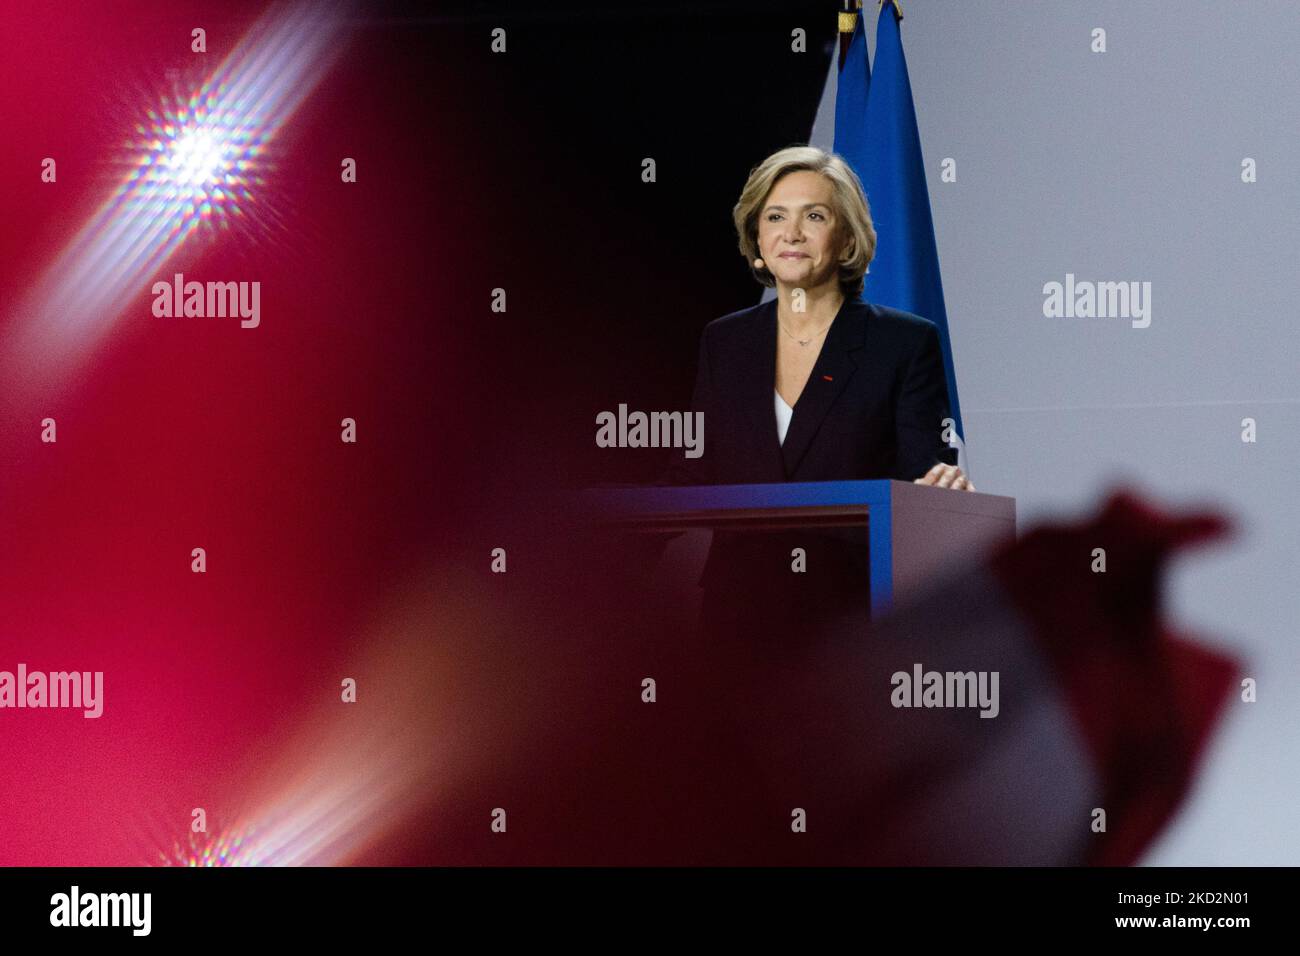 French conservative party Les Républicains (LR) presidential candidate Valérie Pécresse delivers a speech during her rally at the Zenith in Paris, France, Feb. 13, 2022, ahead of the French presidential election in April 2022. (Photo by Samuel Boivin/NurPhoto) Stock Photo